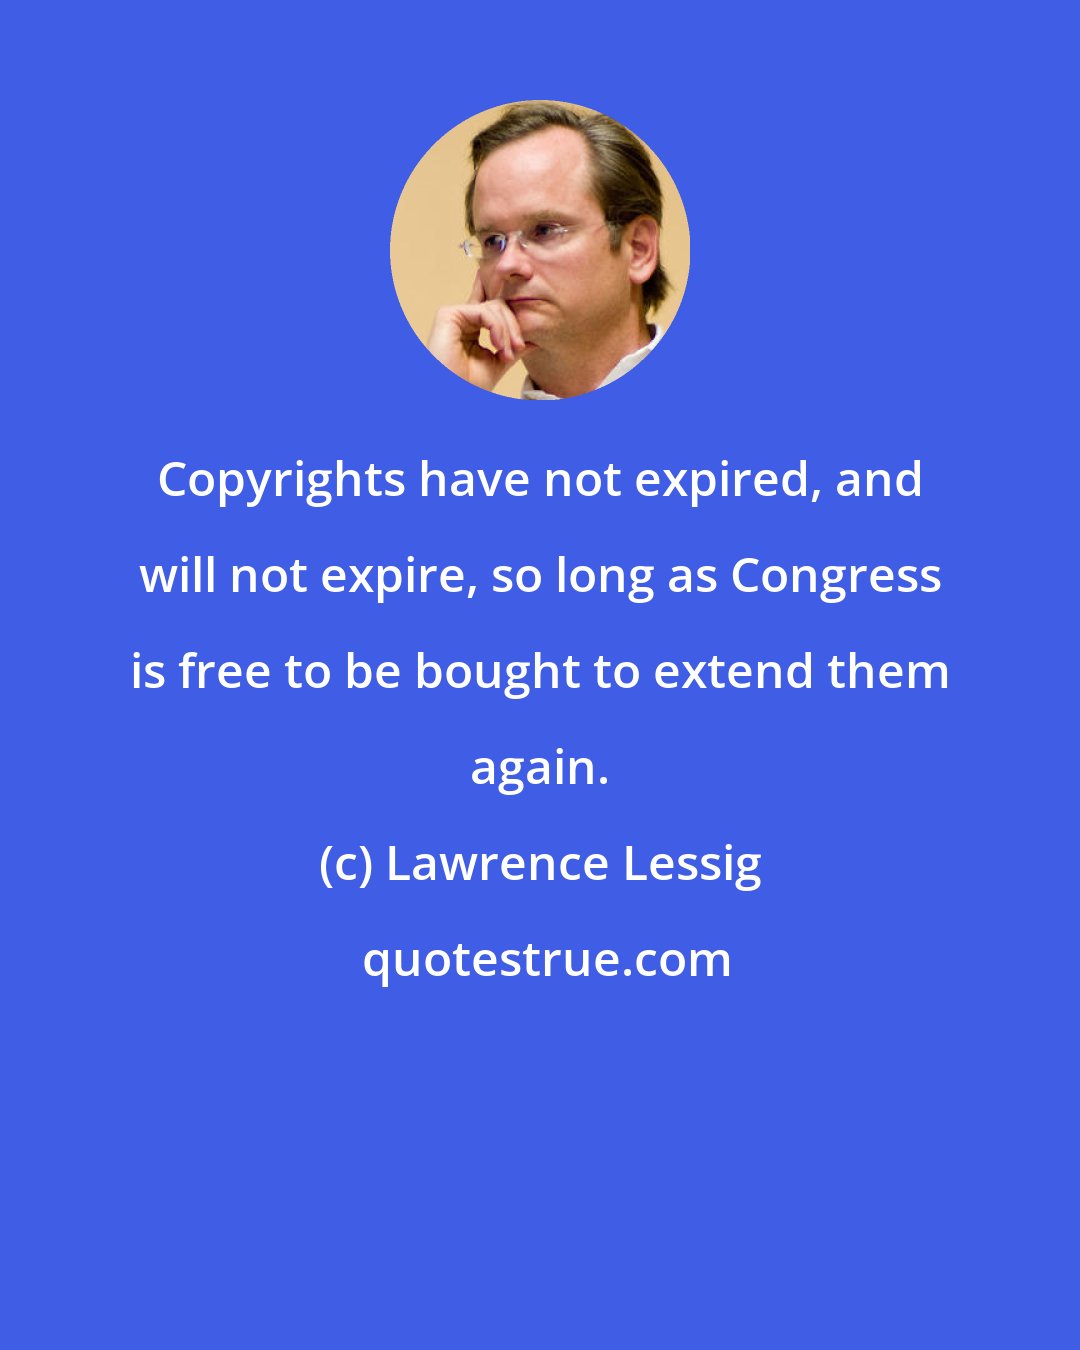 Lawrence Lessig: Copyrights have not expired, and will not expire, so long as Congress is free to be bought to extend them again.